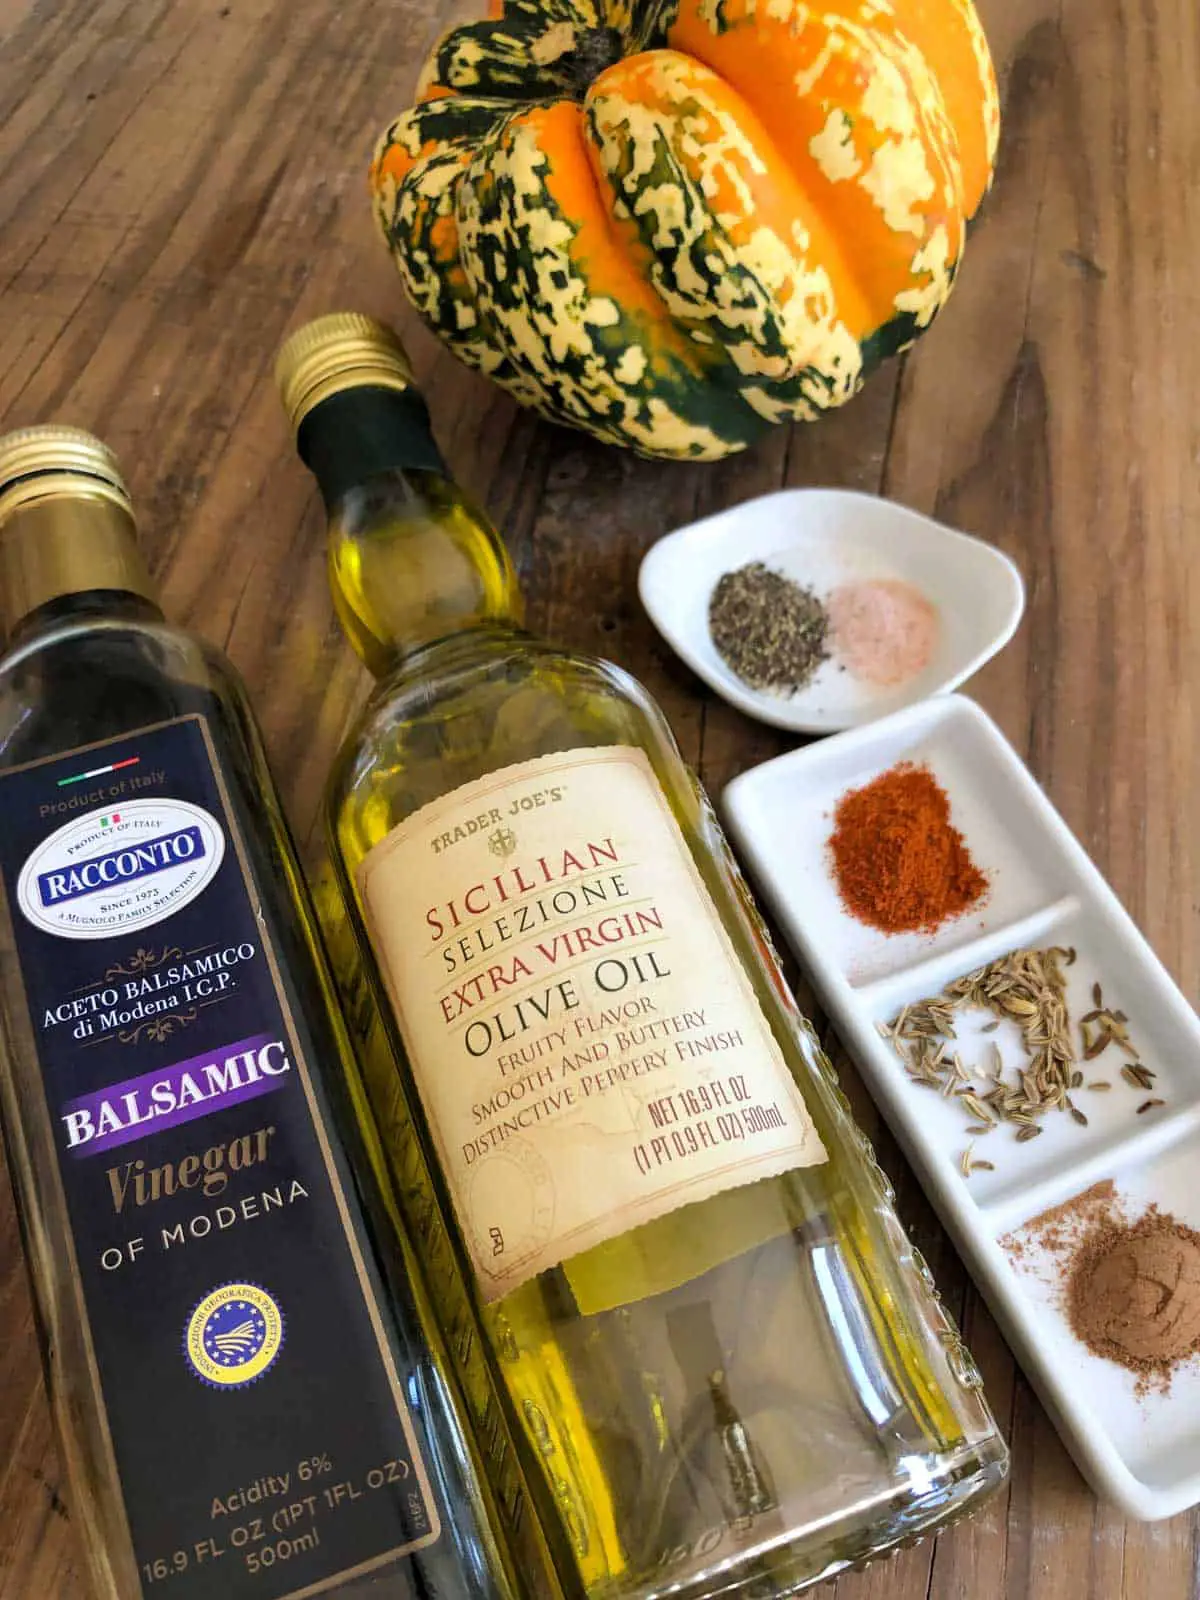 Bottle of olive oil, bottle of balsamic vinegar, a white dish with salt and pepper, a white dish with cayenne, fennel seeds and cinnamon, and a carnival squash.